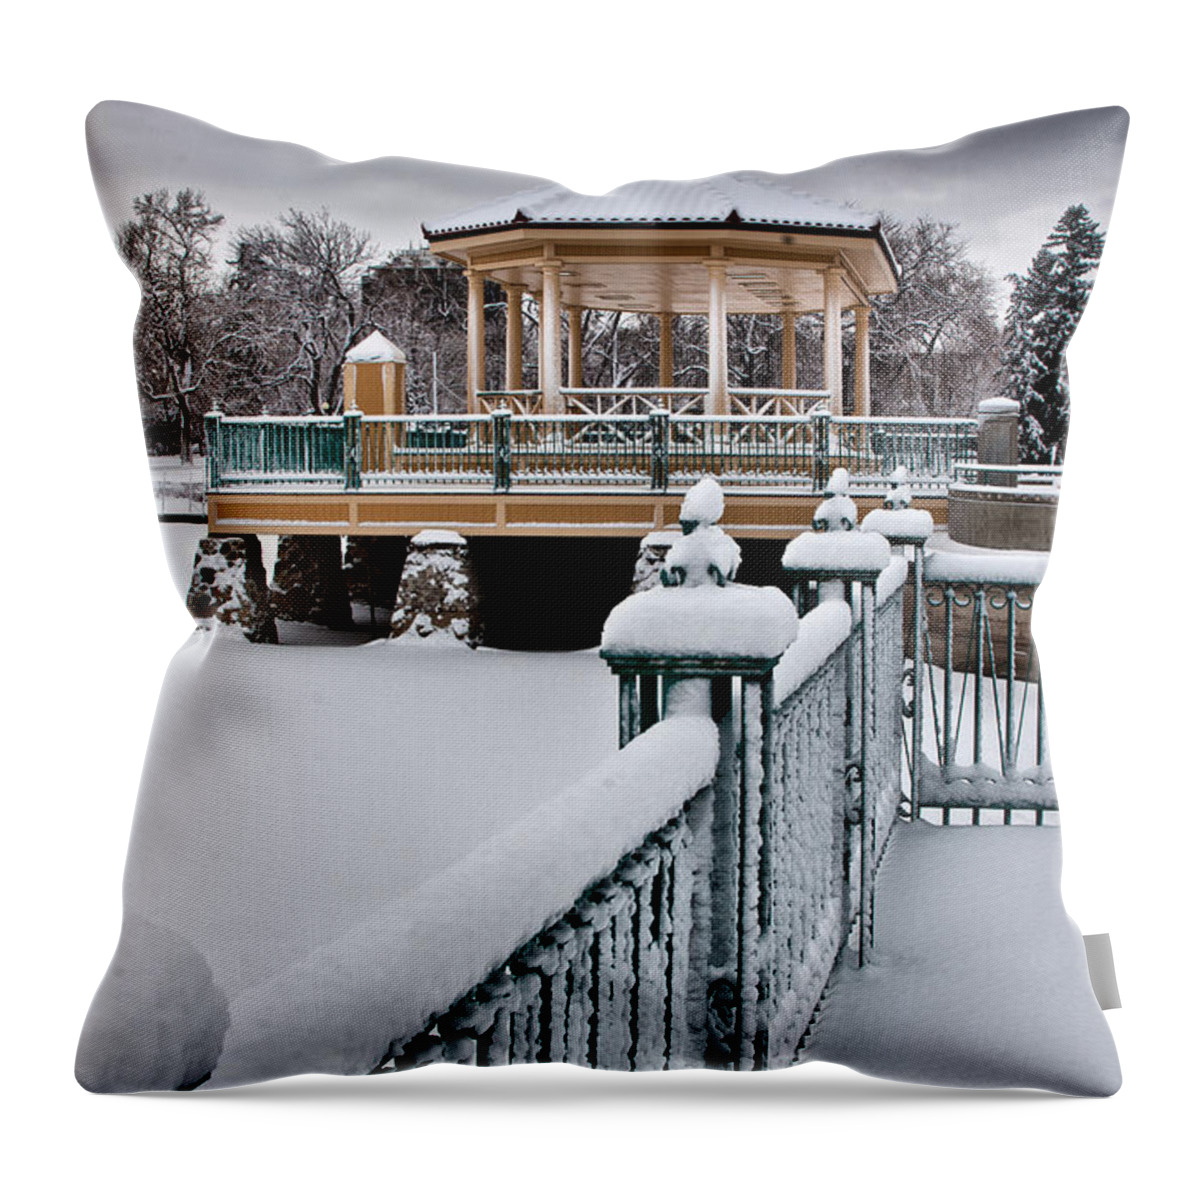 Cityscape Throw Pillow featuring the photograph Winter Gazebo by Steven Reed